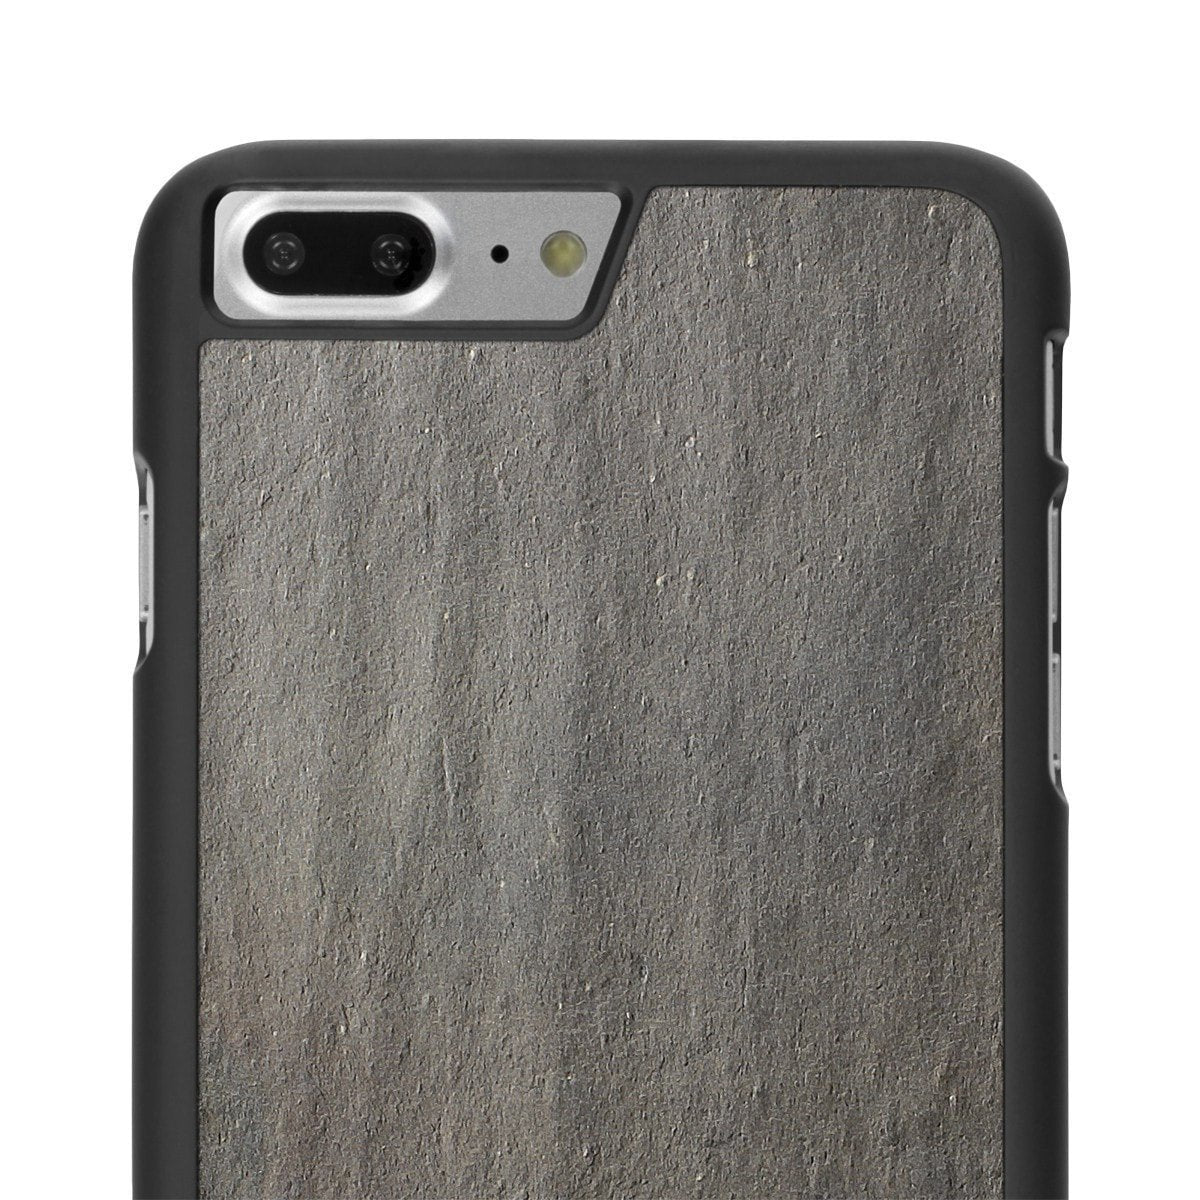  iPhone 8 Plus —  Stone Snap Case - Cover-Up - 6